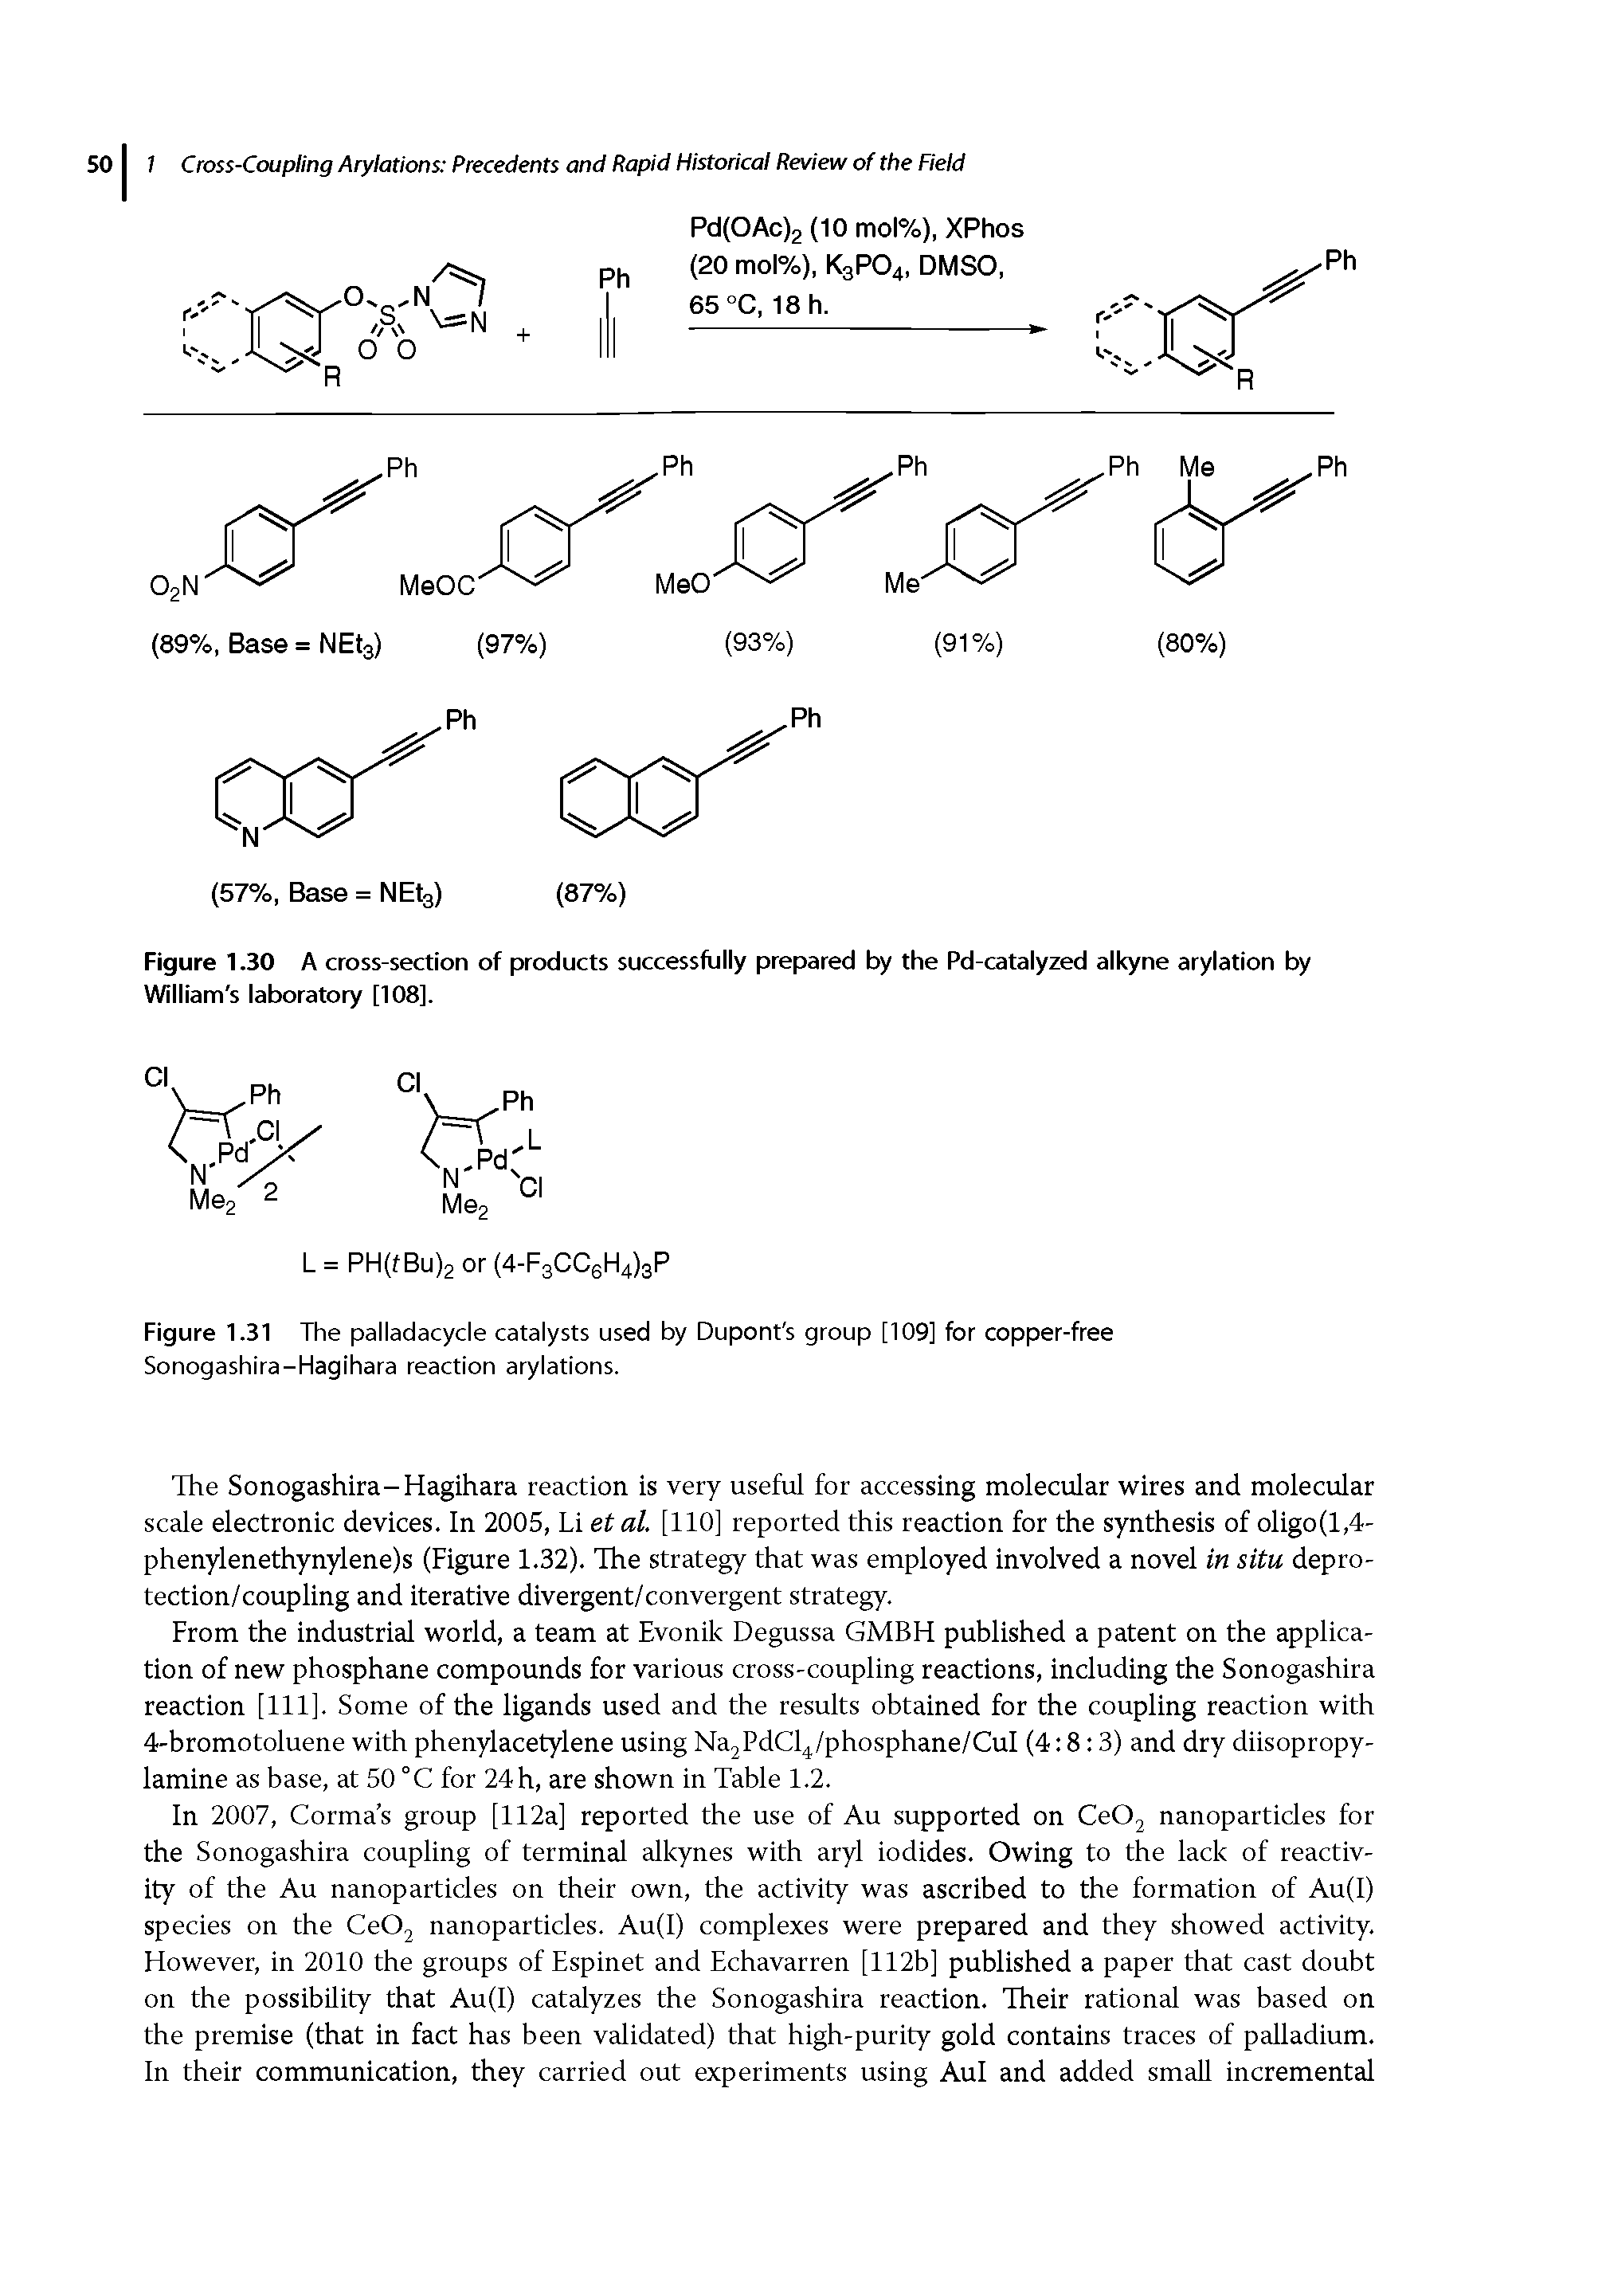 Figure 1.31 The palladacycle catalysts used by Dupont s group [109] for copper-free Sonogashira-Hagihara reaction arylations.